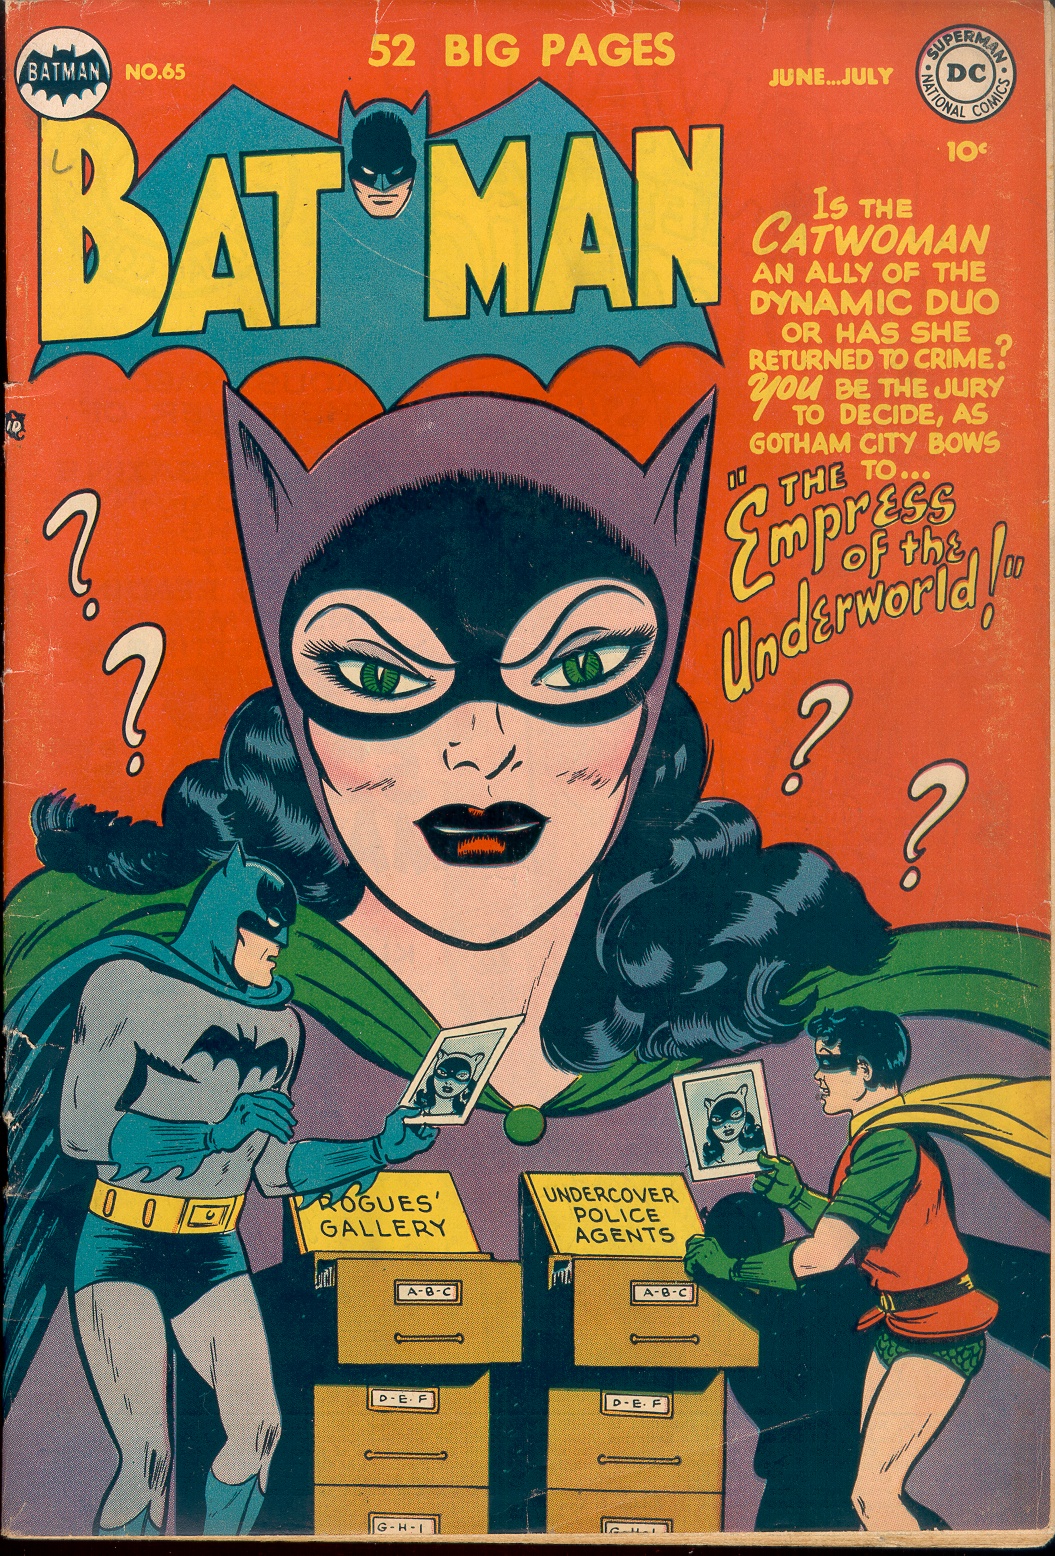 Batman 1940 Issue 65 | Read Batman 1940 Issue 65 comic online in high  quality. Read Full Comic online for free - Read comics online in high  quality .|